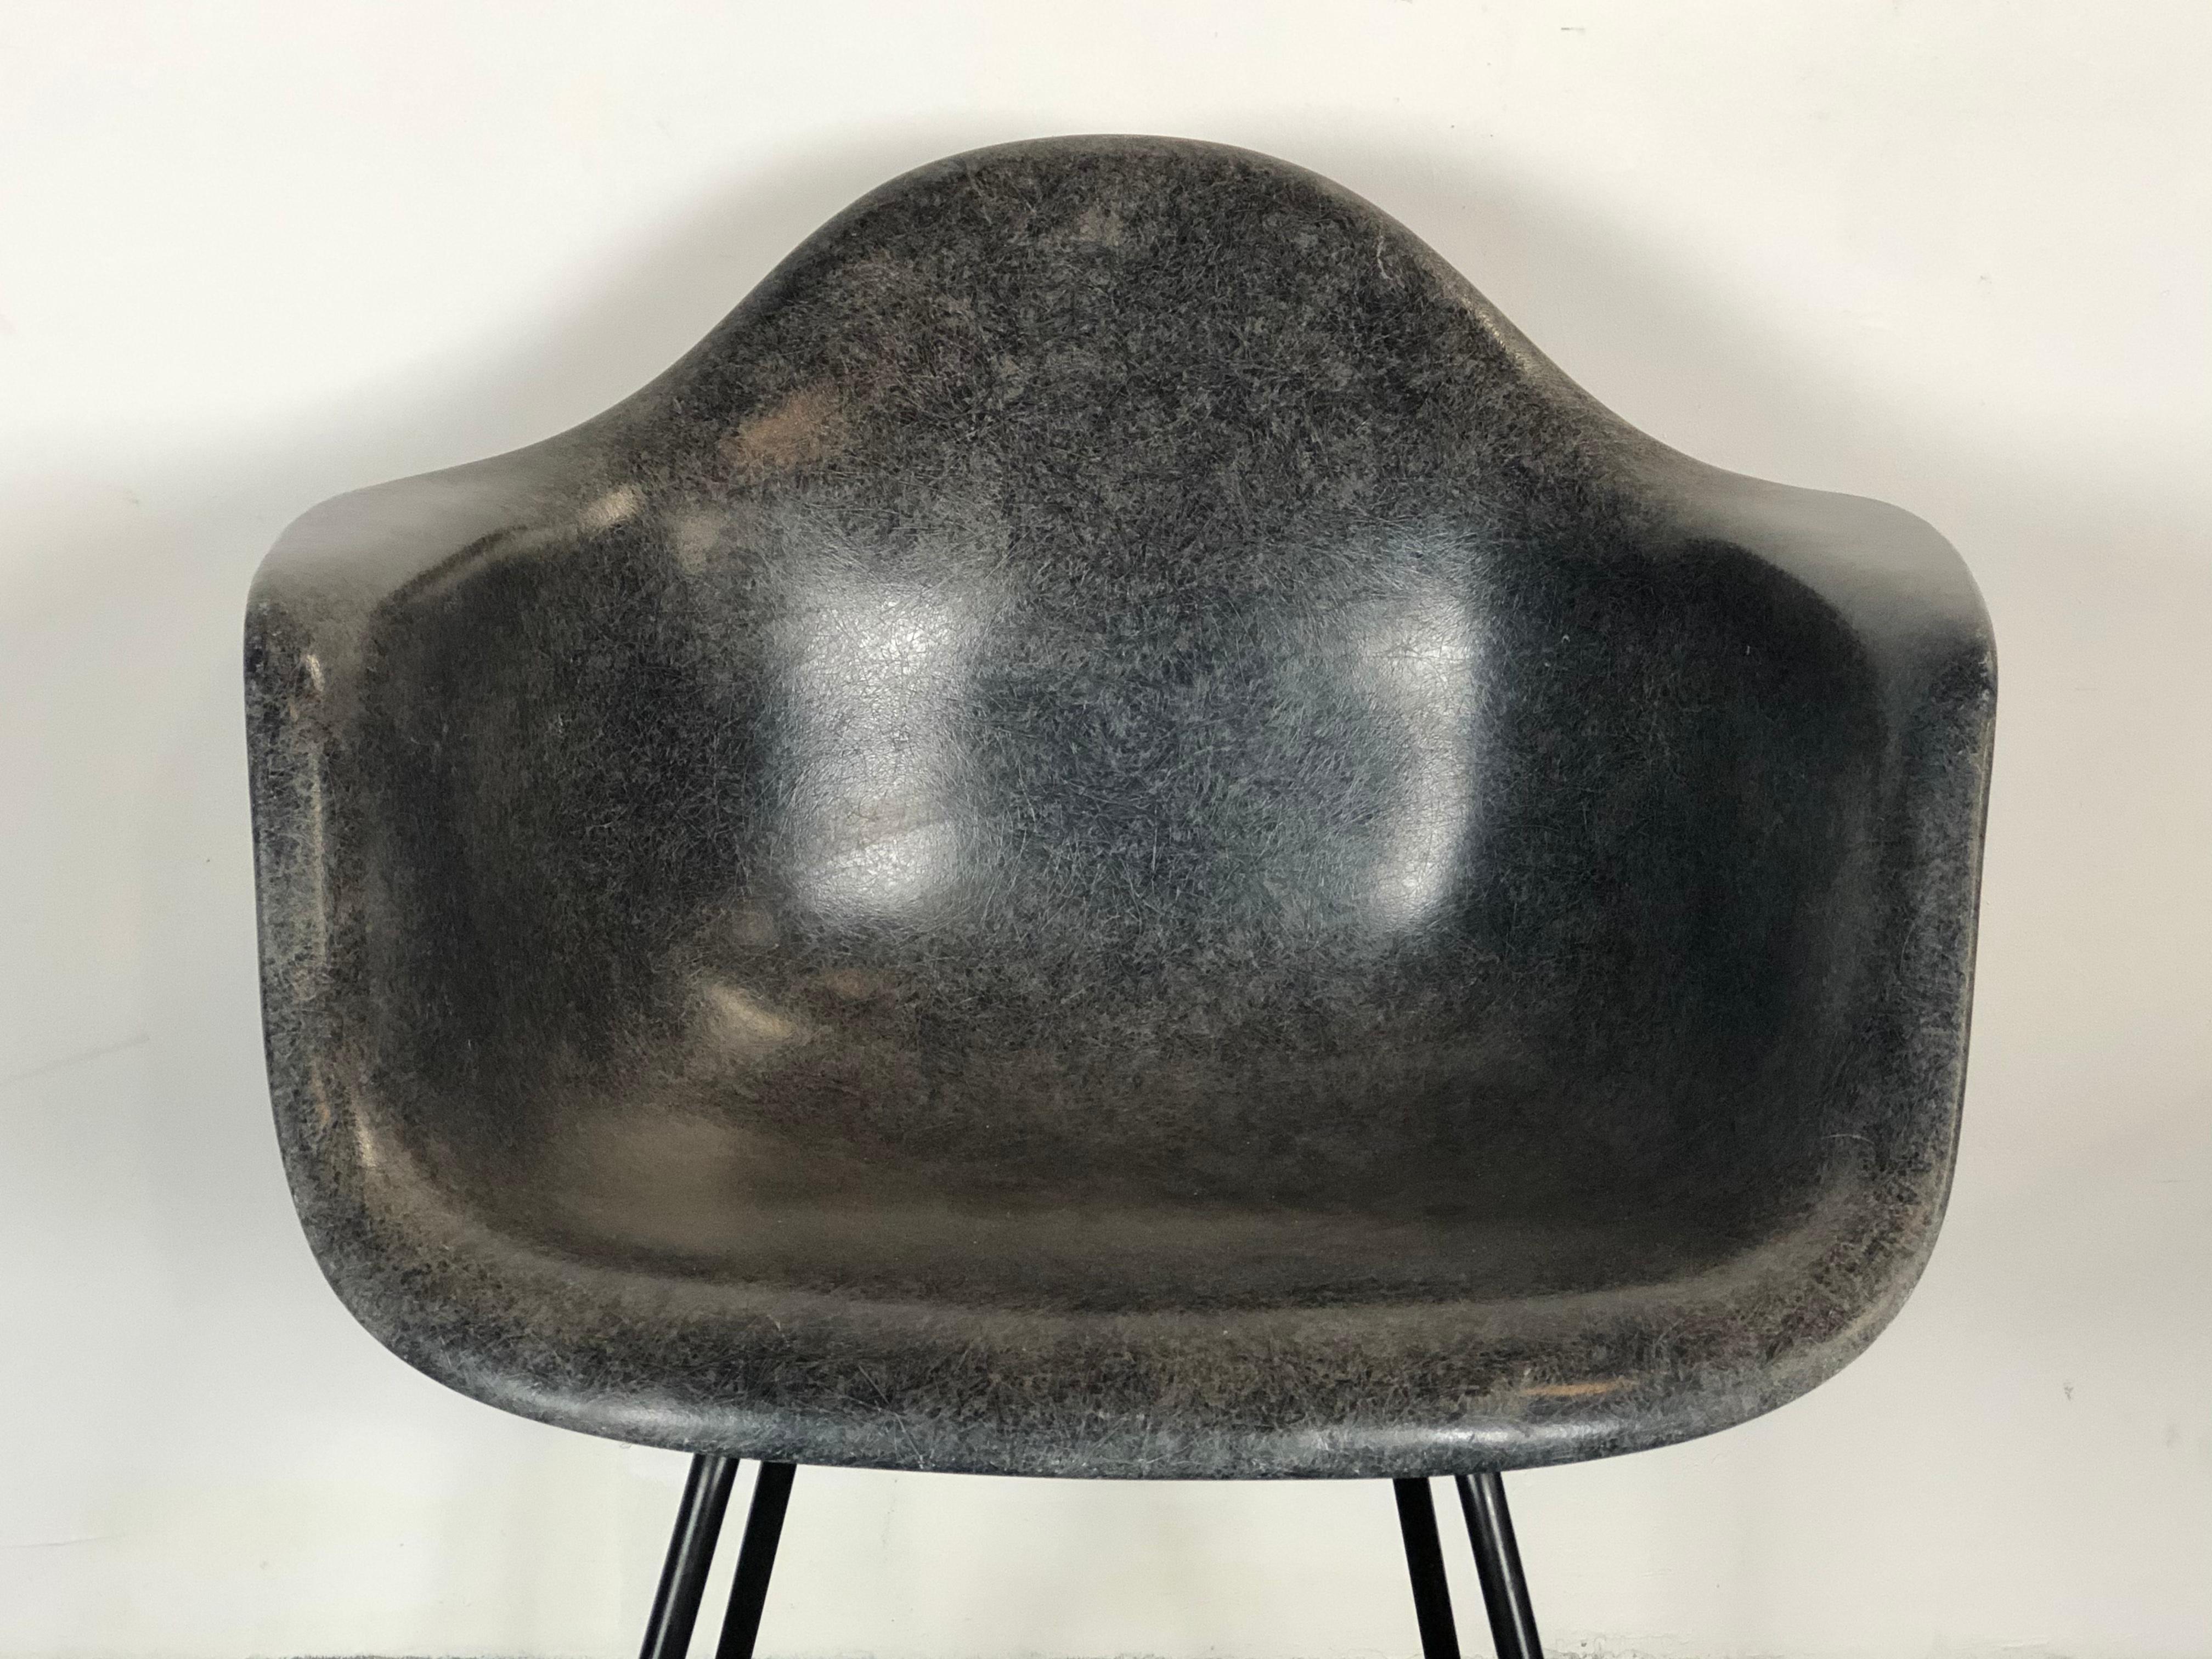 Spectacular and rare Herman Miller Eames fiberglass armchair. Gorgeous textured shell on black steel base. All shock mounts intact and self leveling floor glides present. This is a very sought after yet seldom found color. This particular shell